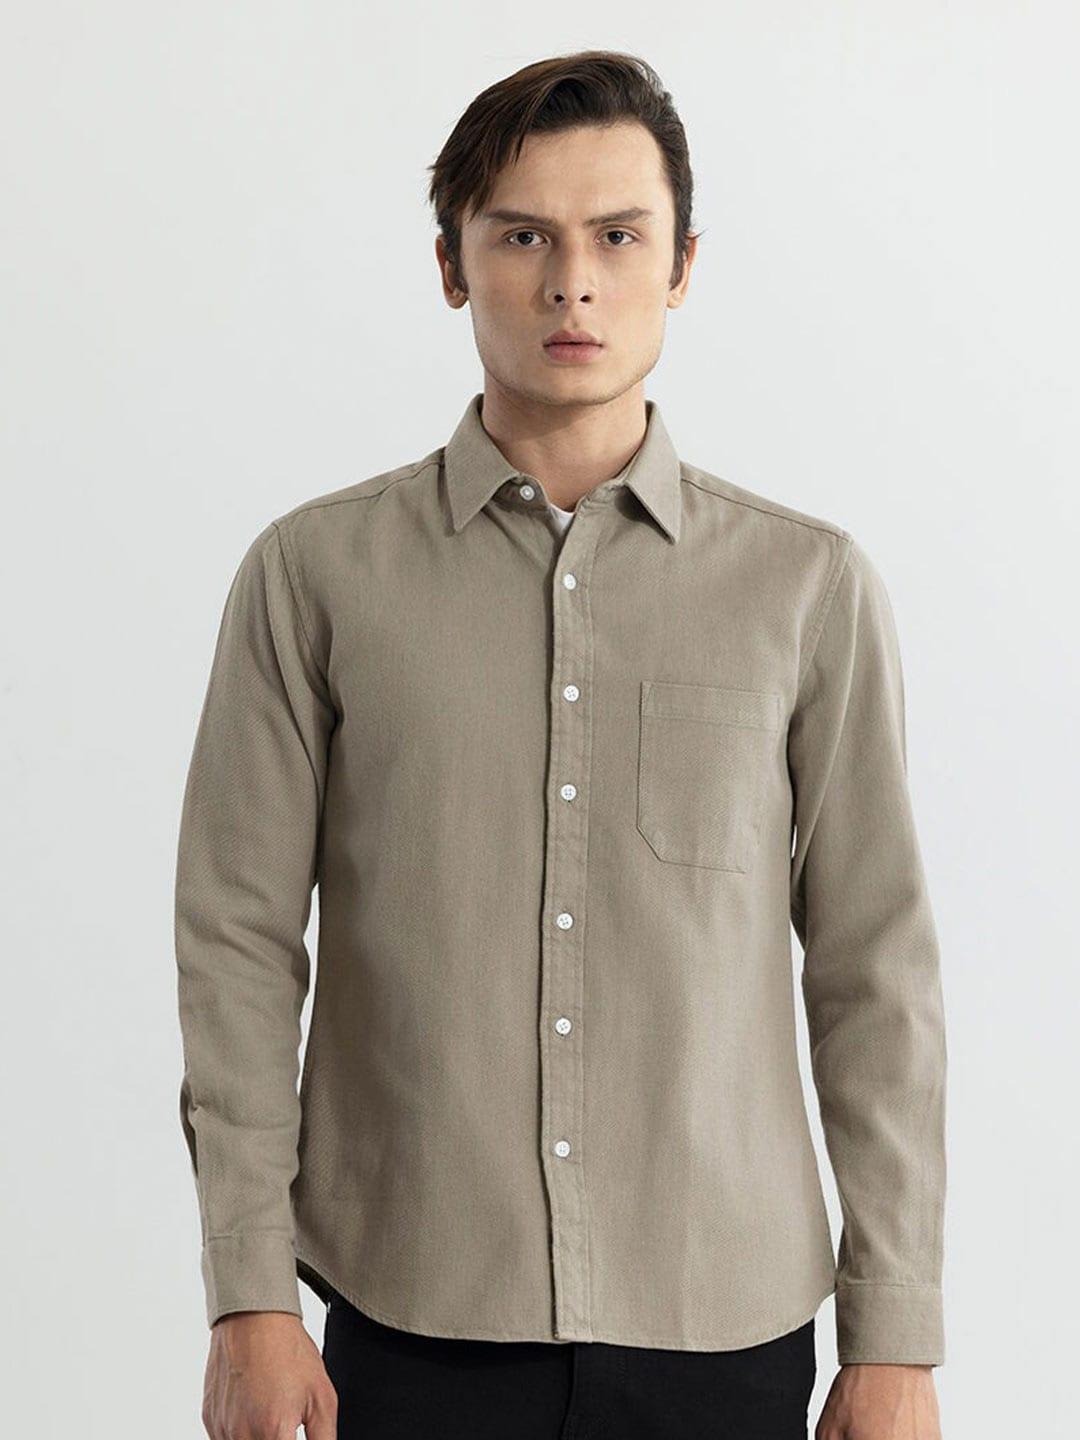 Snitch Khaki Classic Slim Fit Spread Collar Long Sleeves Cotton Casual Shirt